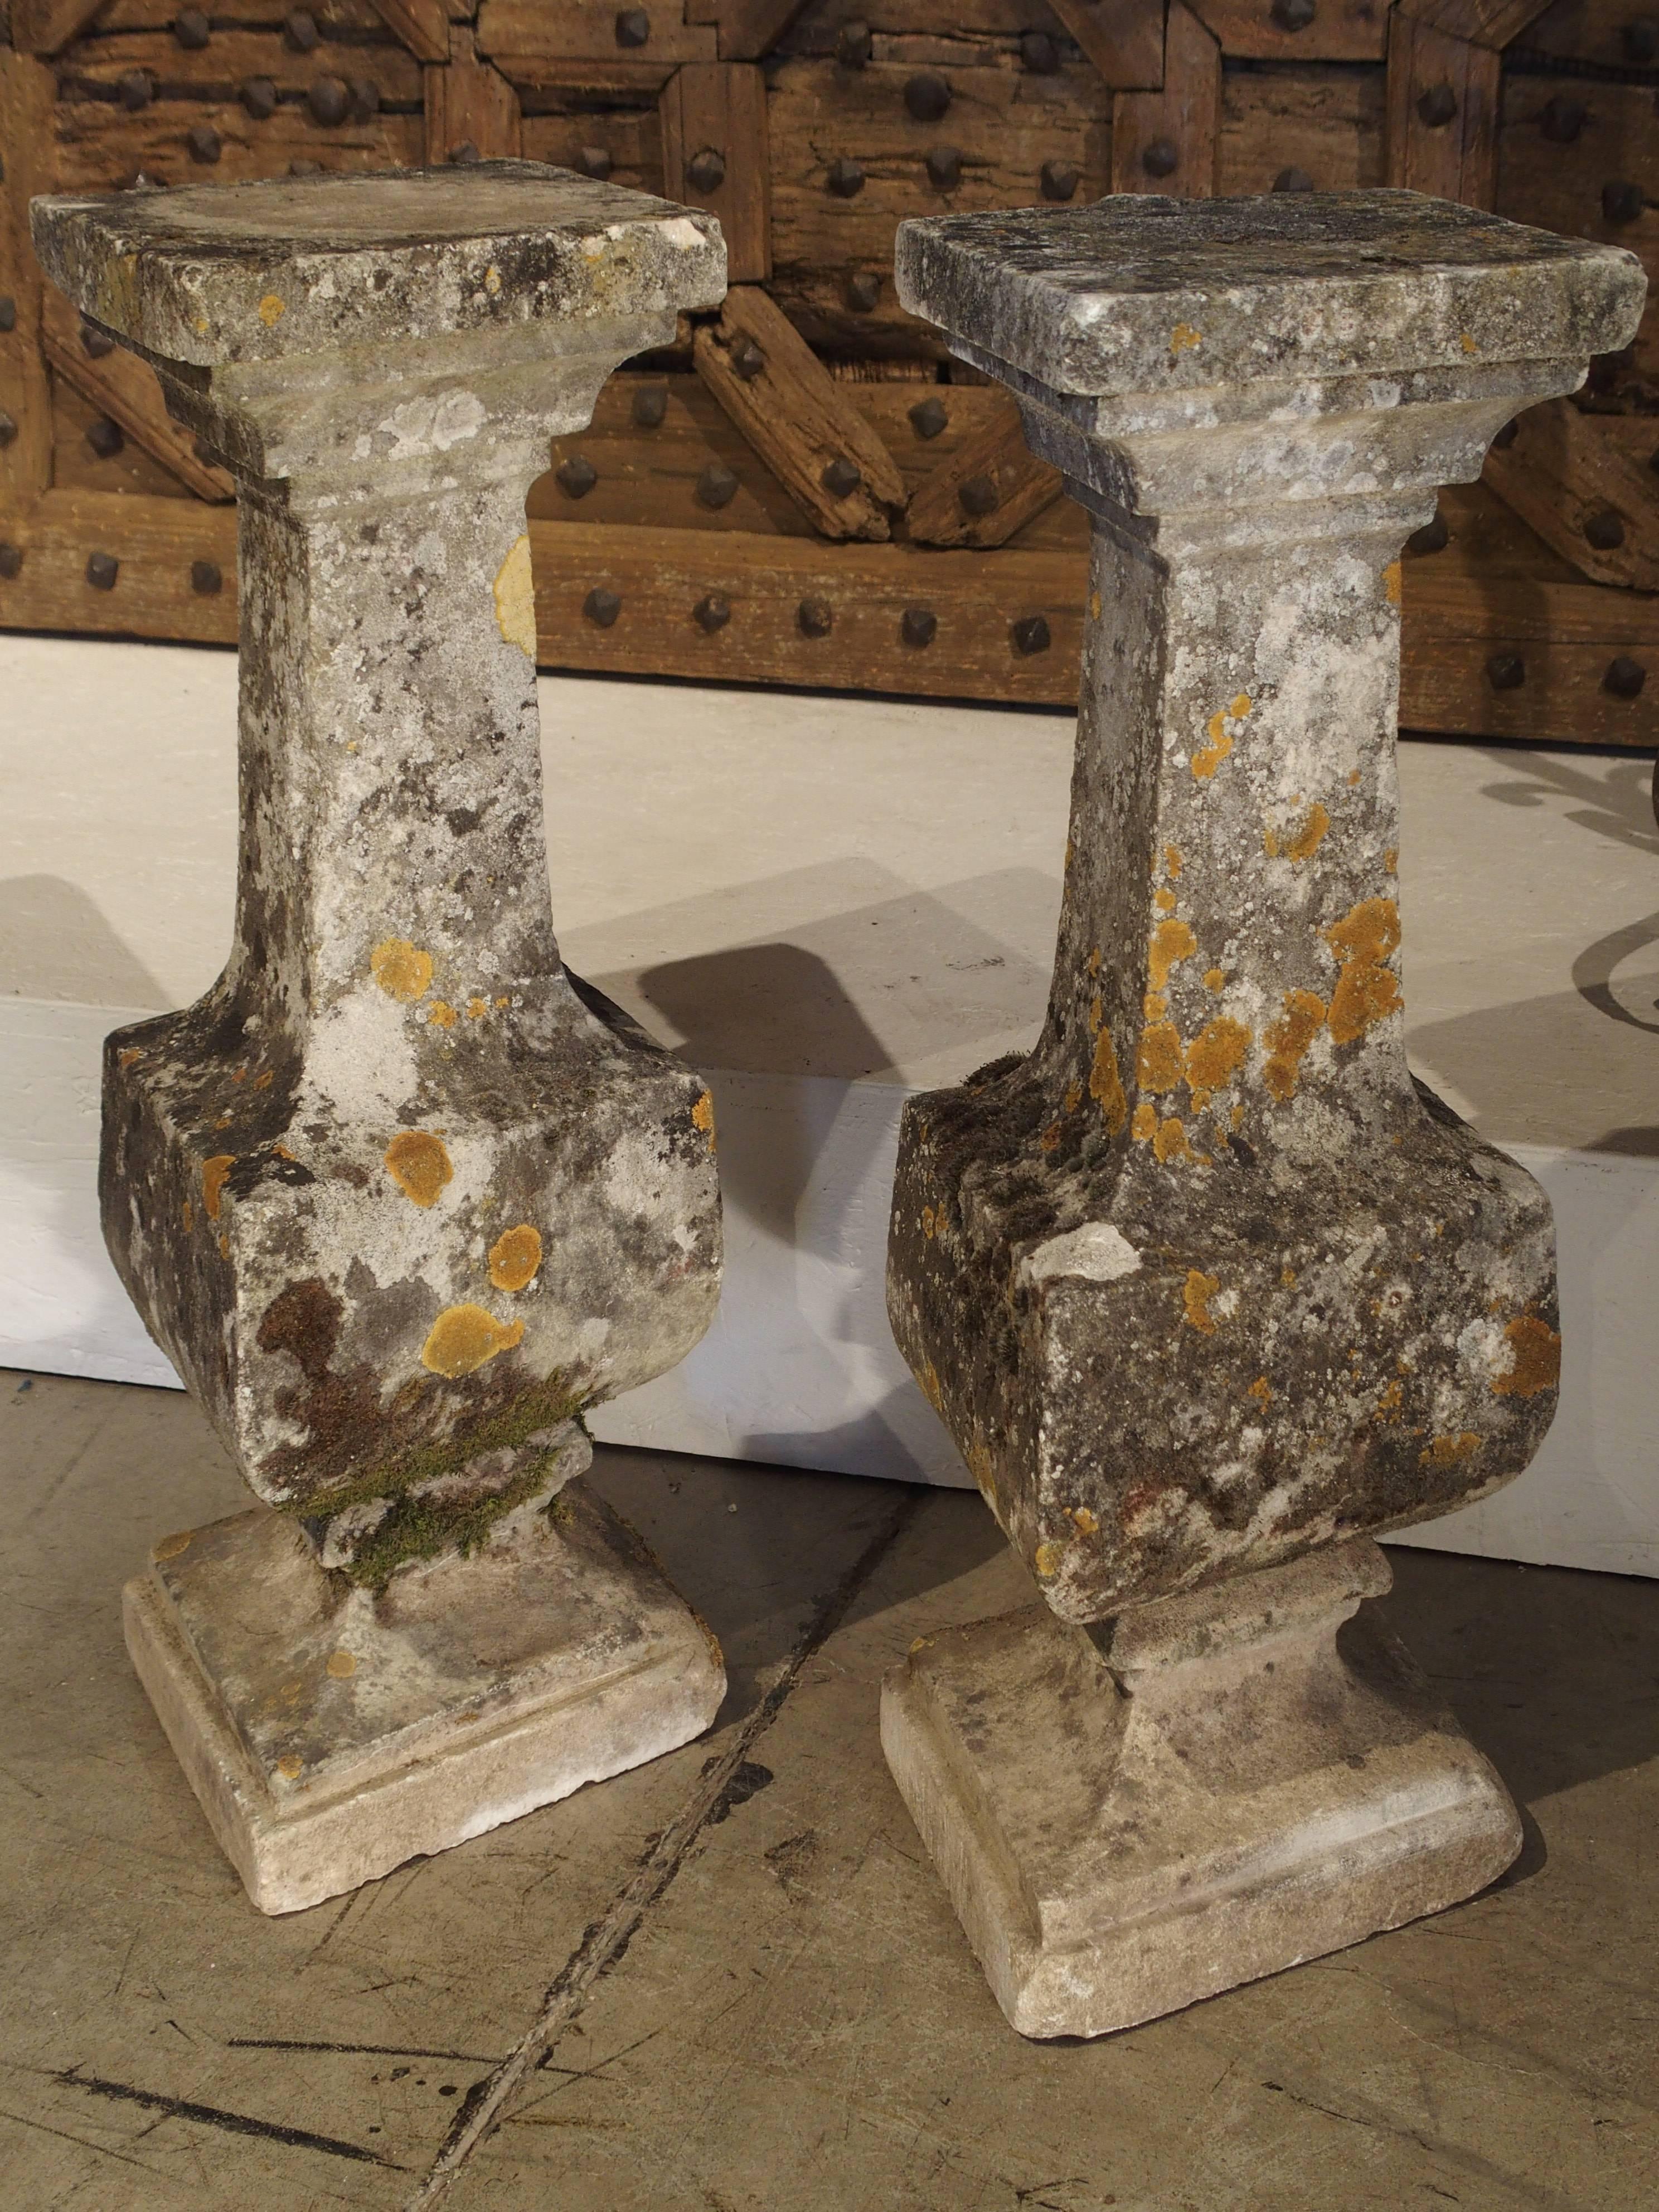 Hand-carved stone, unusual shape

This pair of antique French, carved stone balusters were once part of a stone railing. They have an unusual diamond shape as opposed to the square or round shape seen so often. Today, these would make wonderful